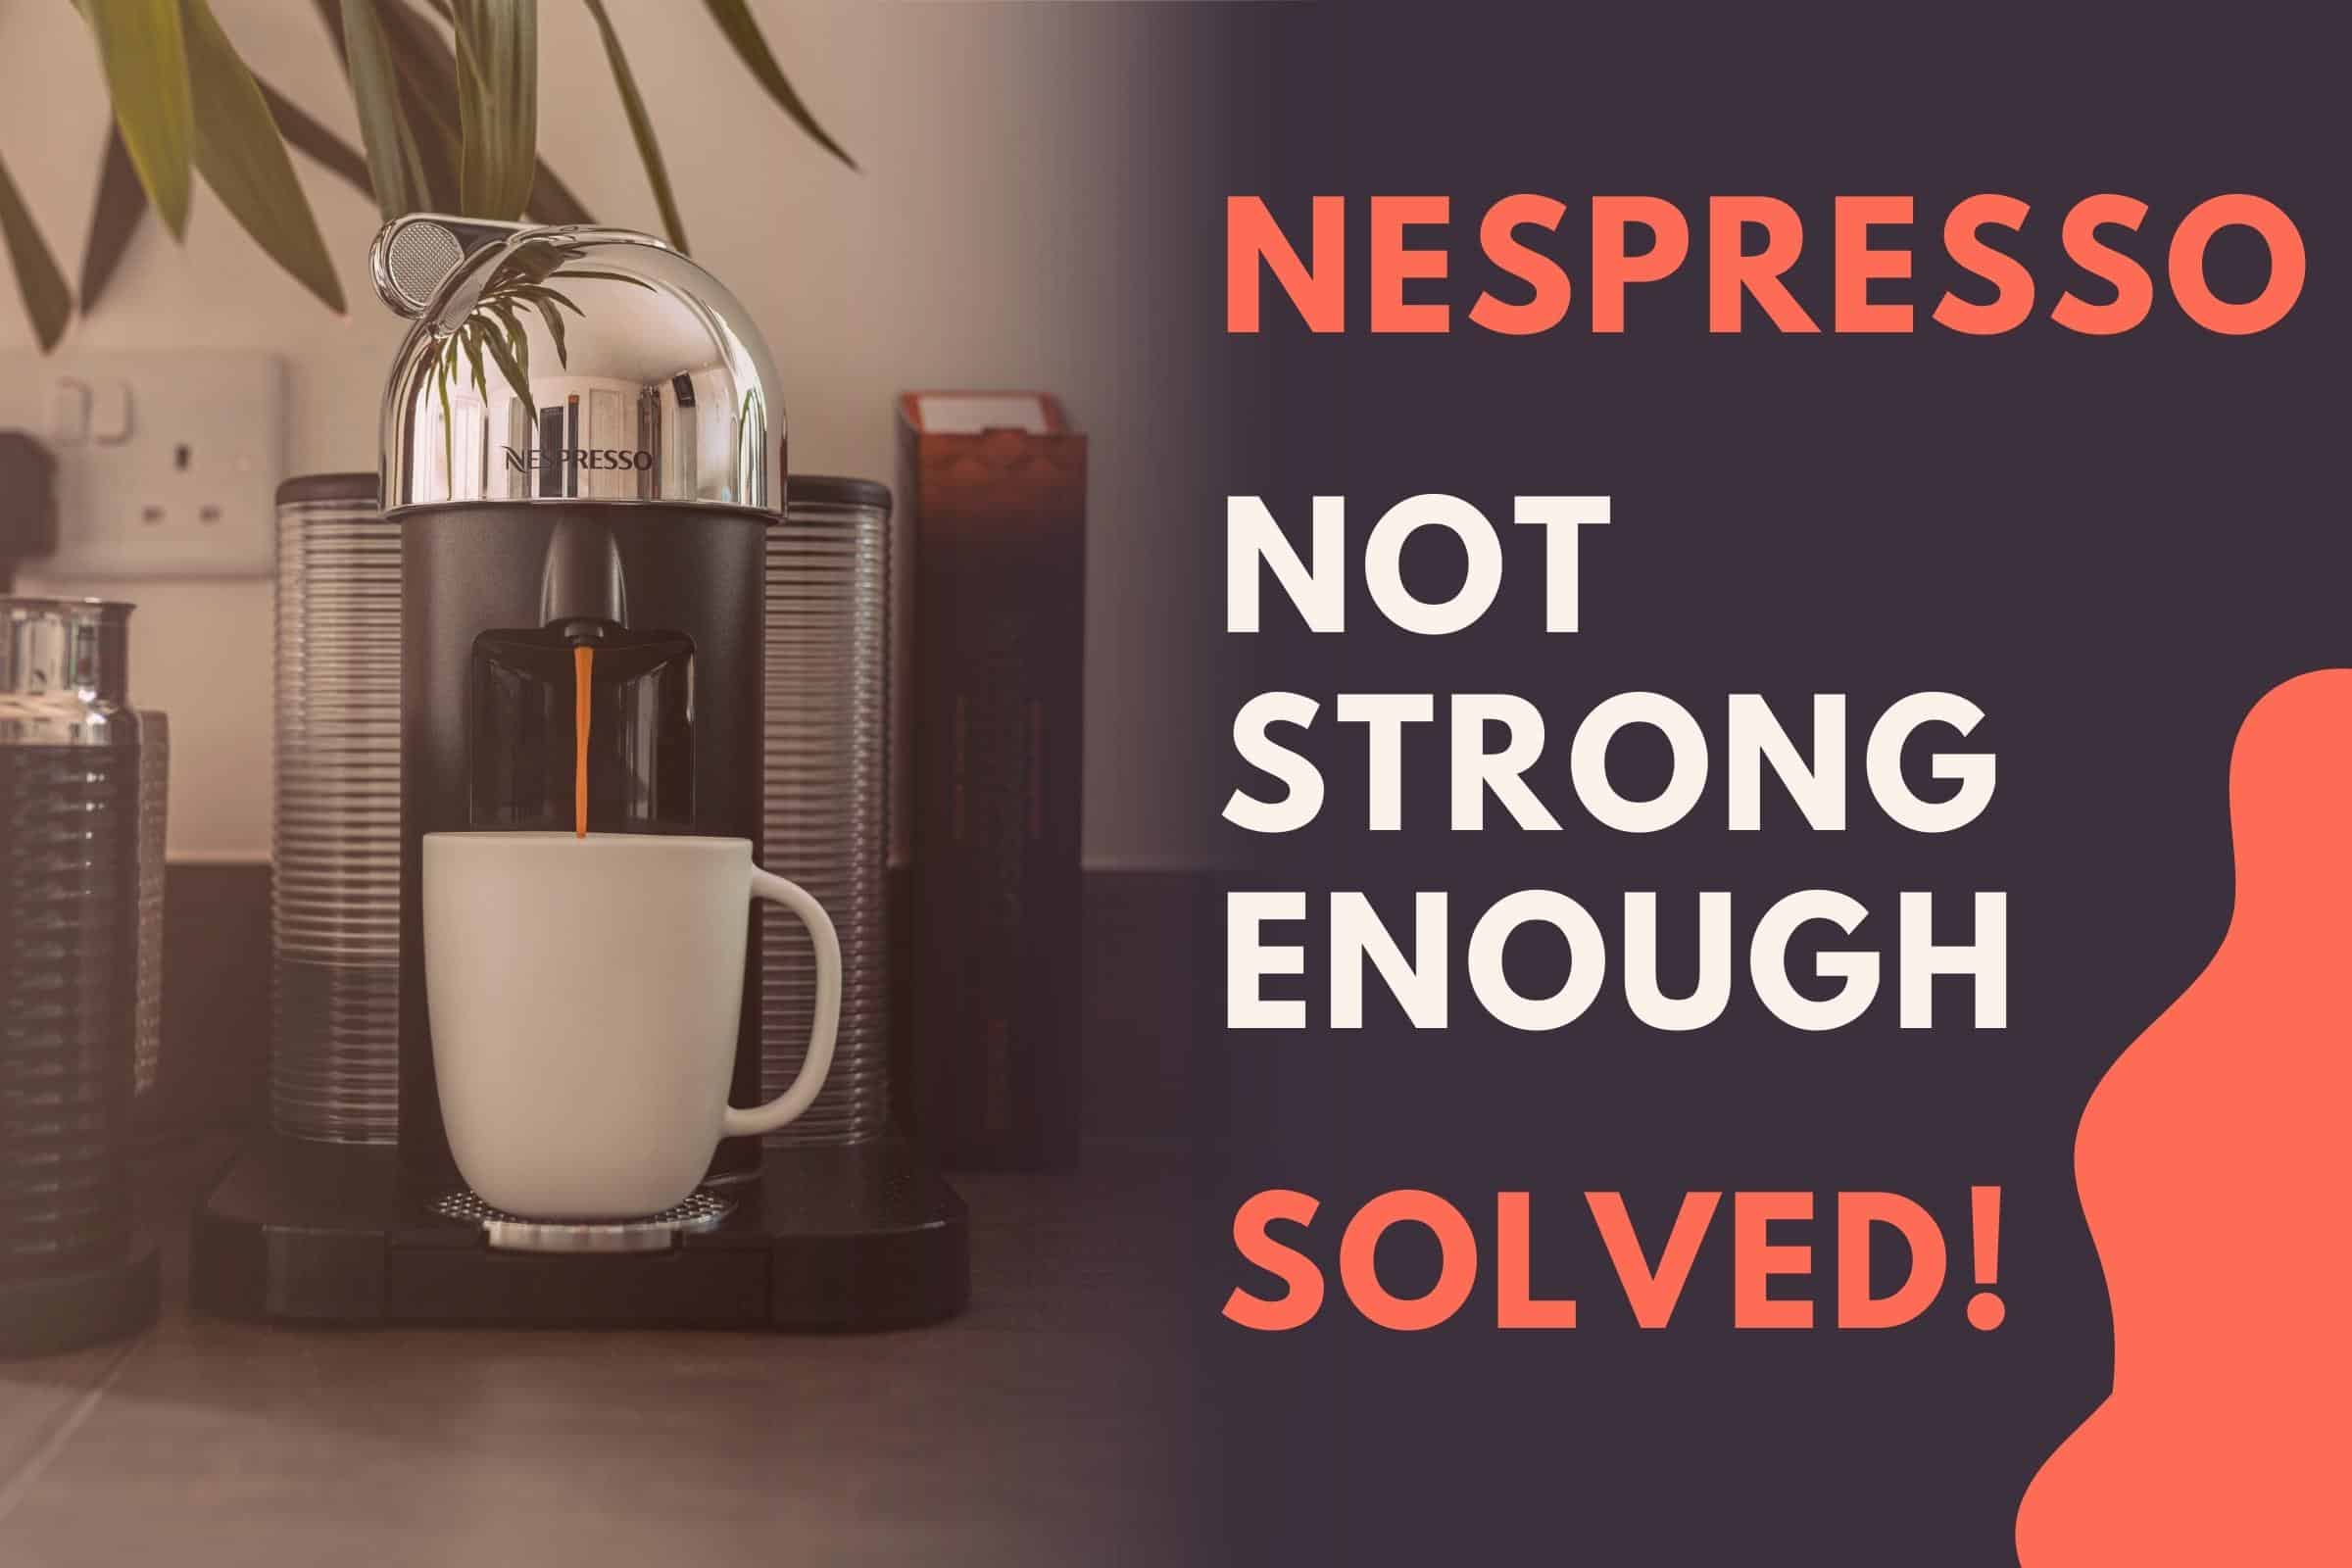 Nespresso not strong enough